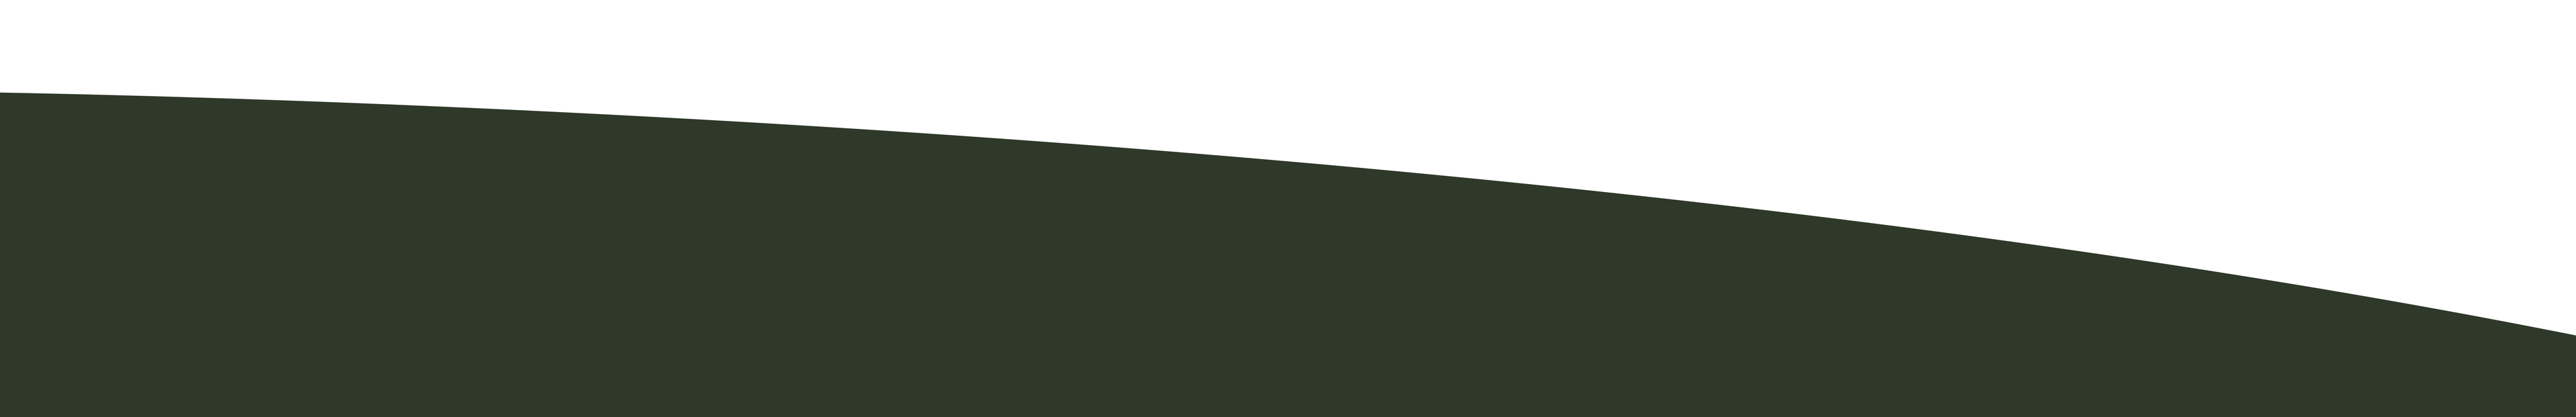 Graphic image of a green slope